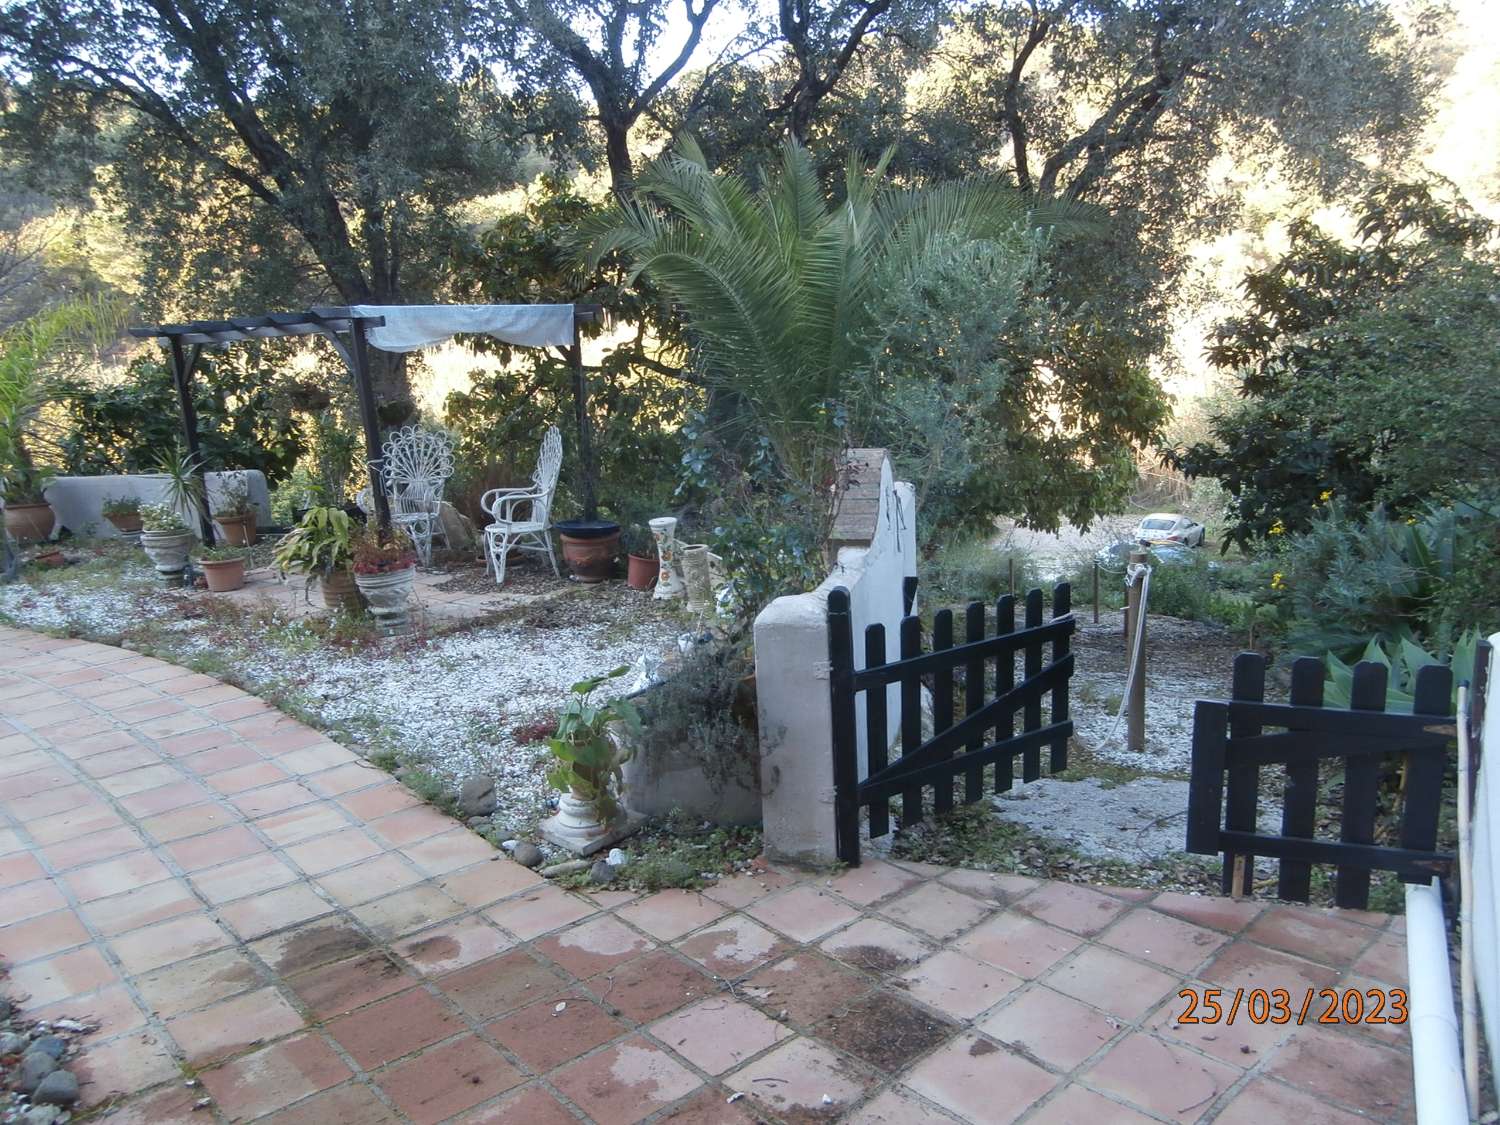 REDUCED PRICE, Great country house for sale, water well, total 9,000m2 approx.